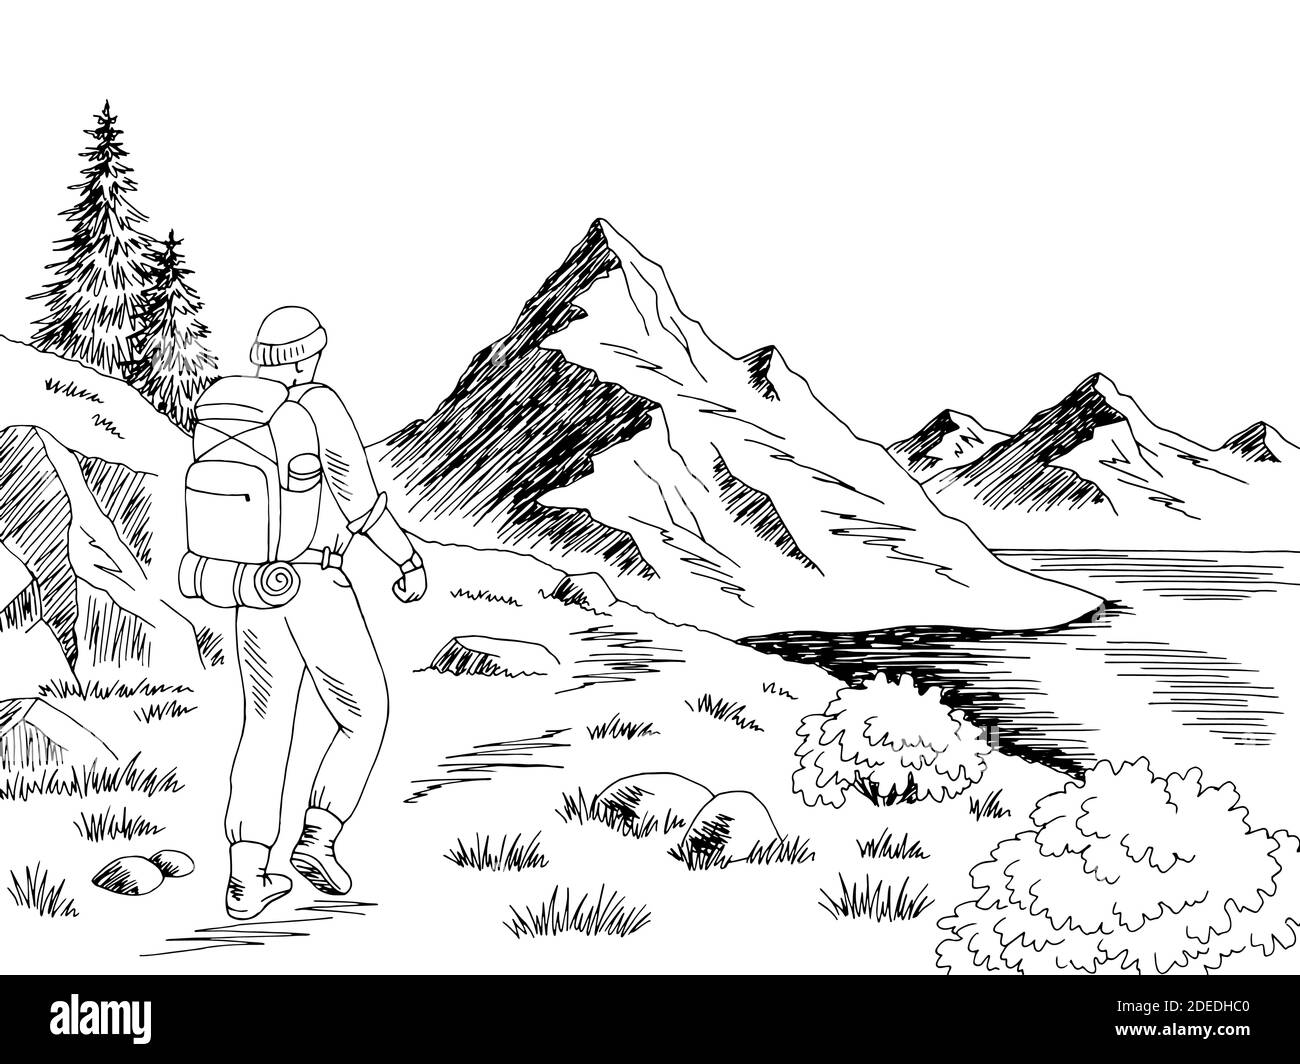 Hiker tourist walking at the mountains graphic black white landscape sketch illustration vector Stock Vector